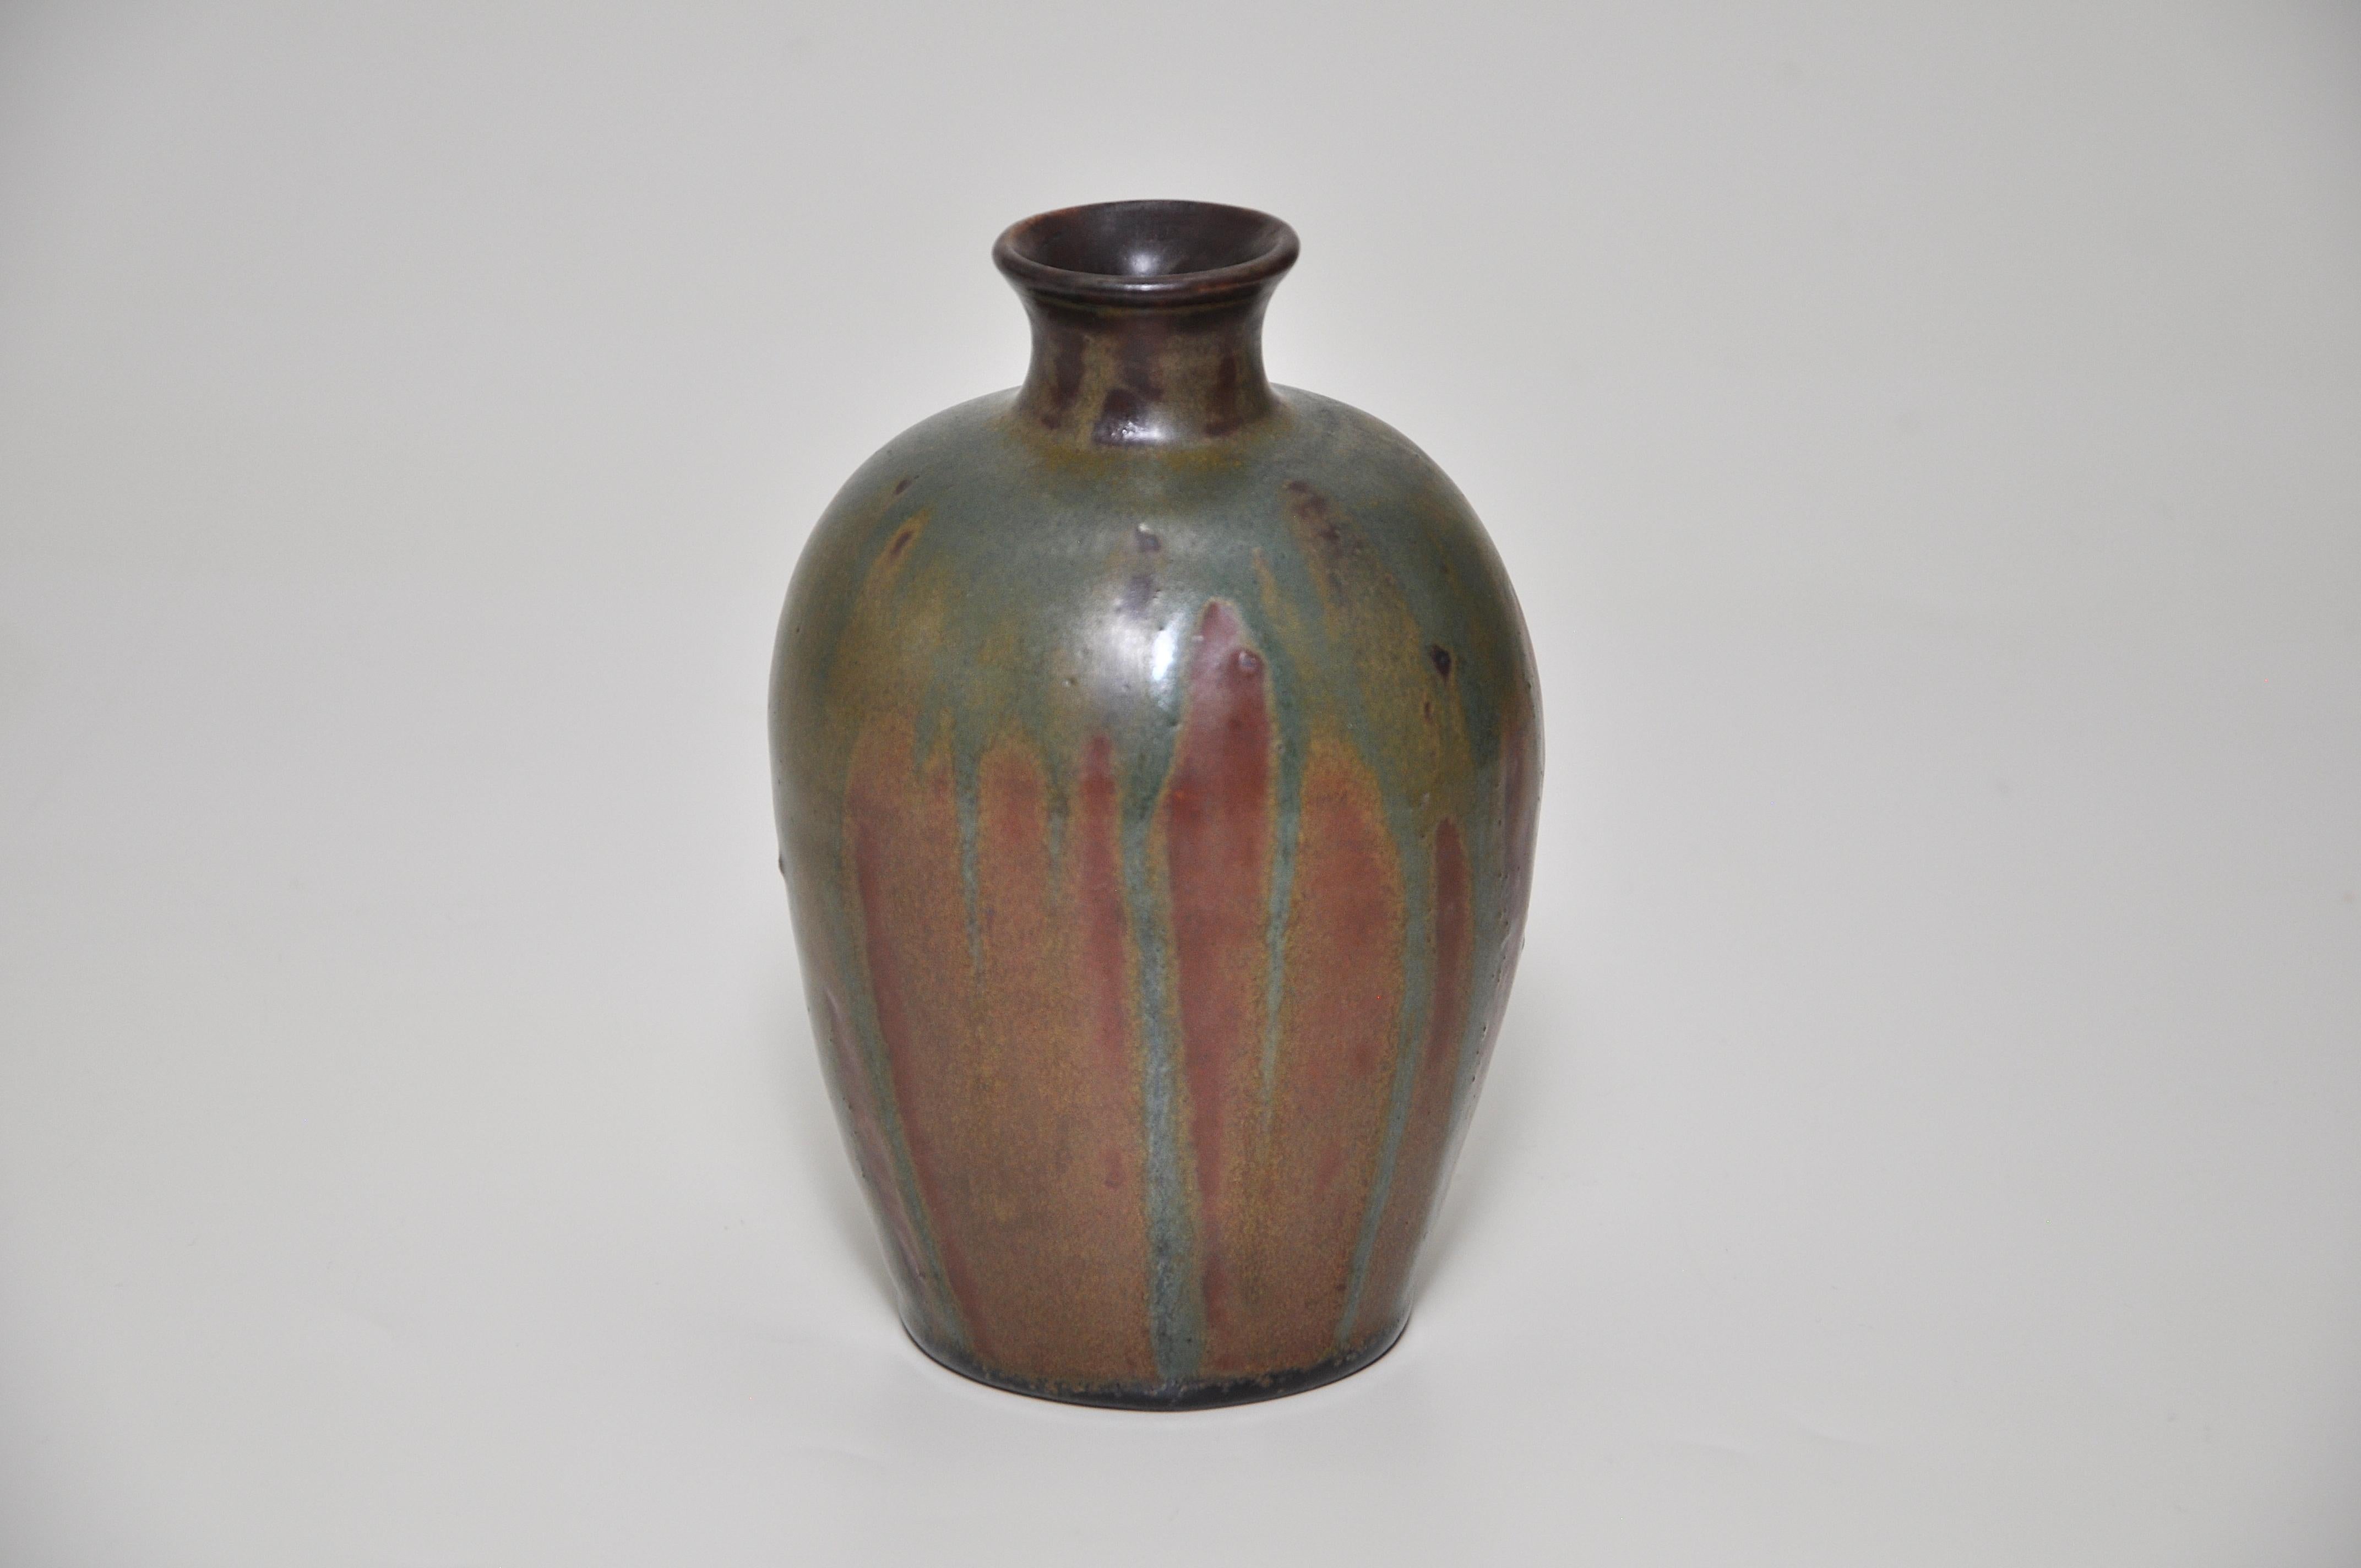 20th Century French Art Nouveau Ceramic Vase by Lucien Arnaud Green Brown For Sale